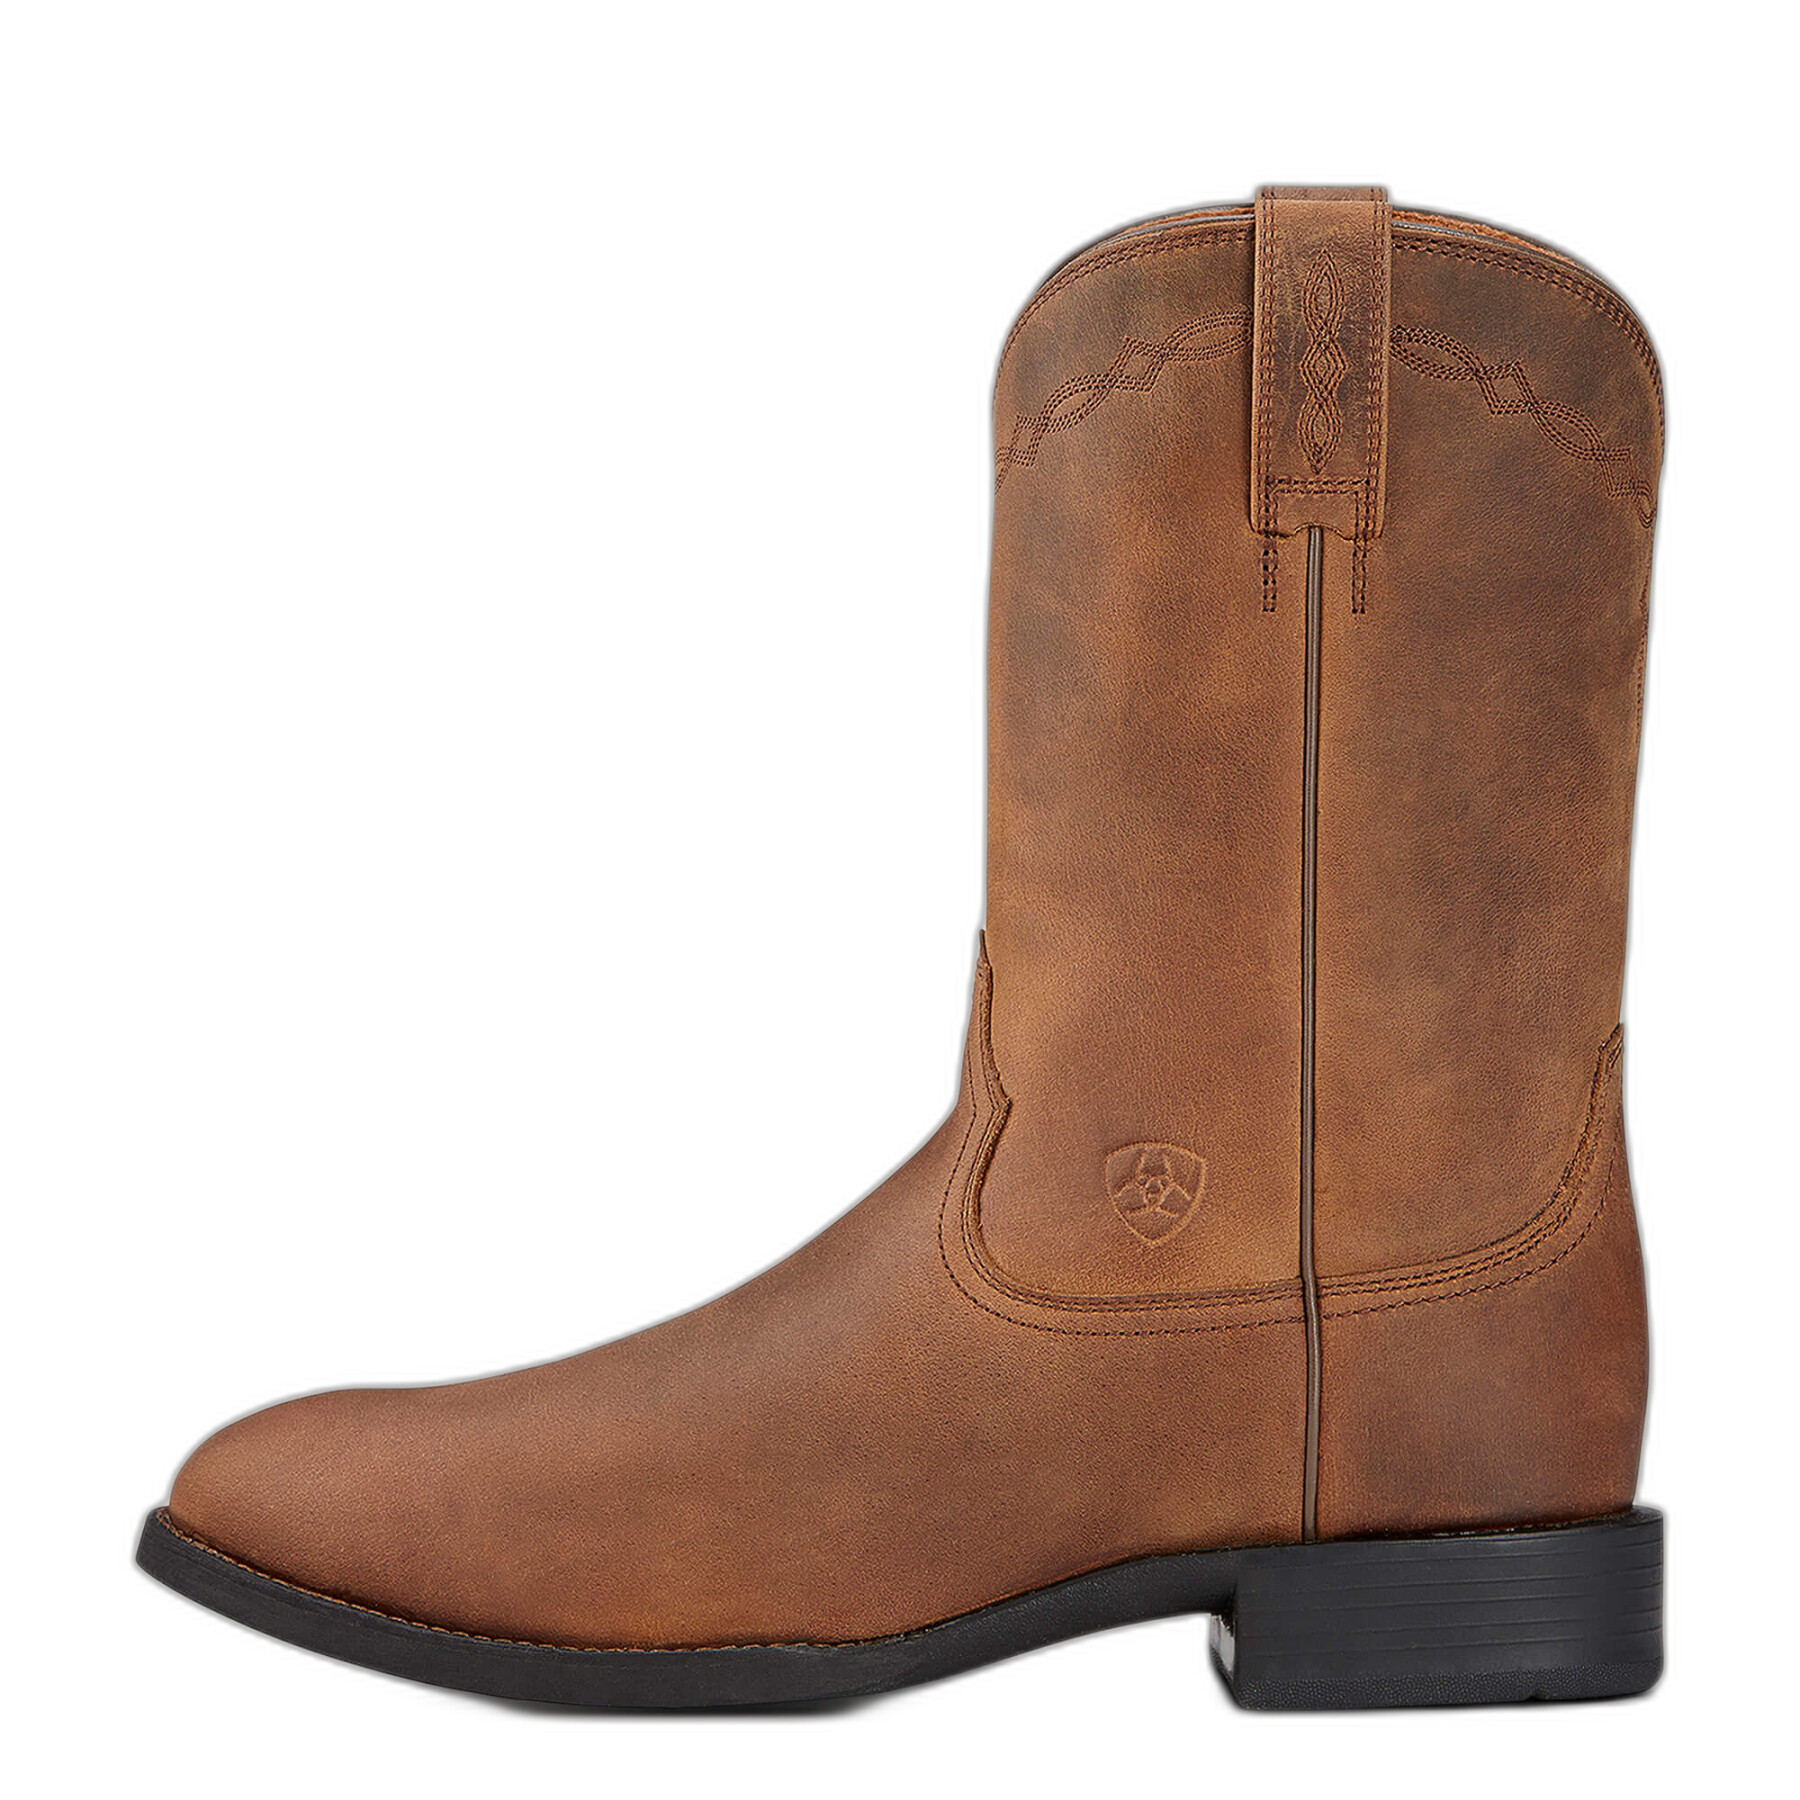 Leather western boots Ariat Heritage Roper